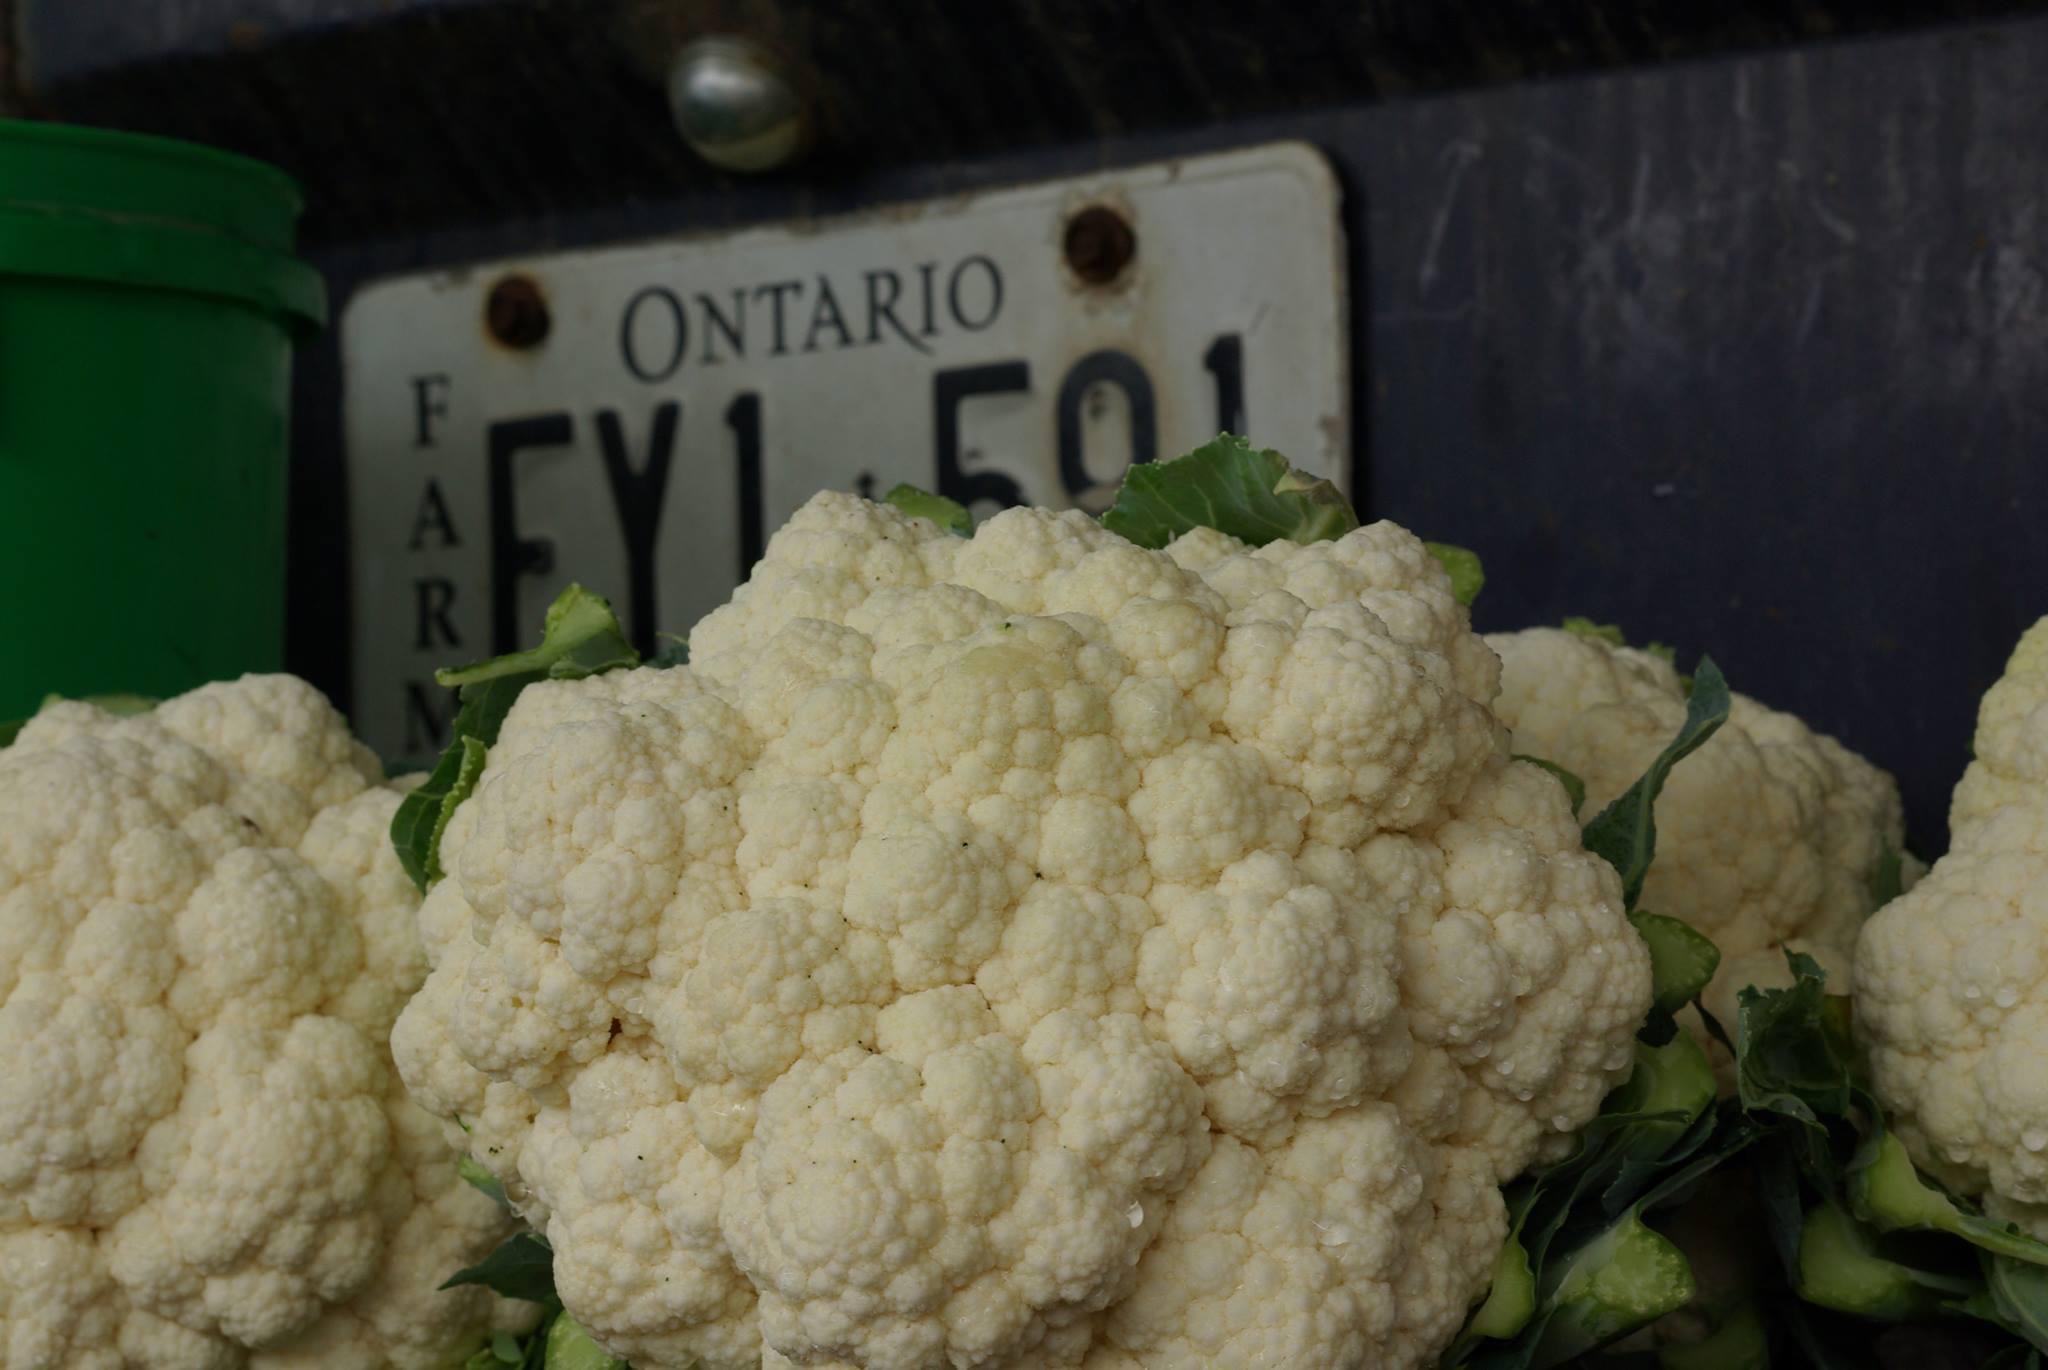 Fresh cauliflower sits on the bumper of a truck next to an Ontario licence plate.